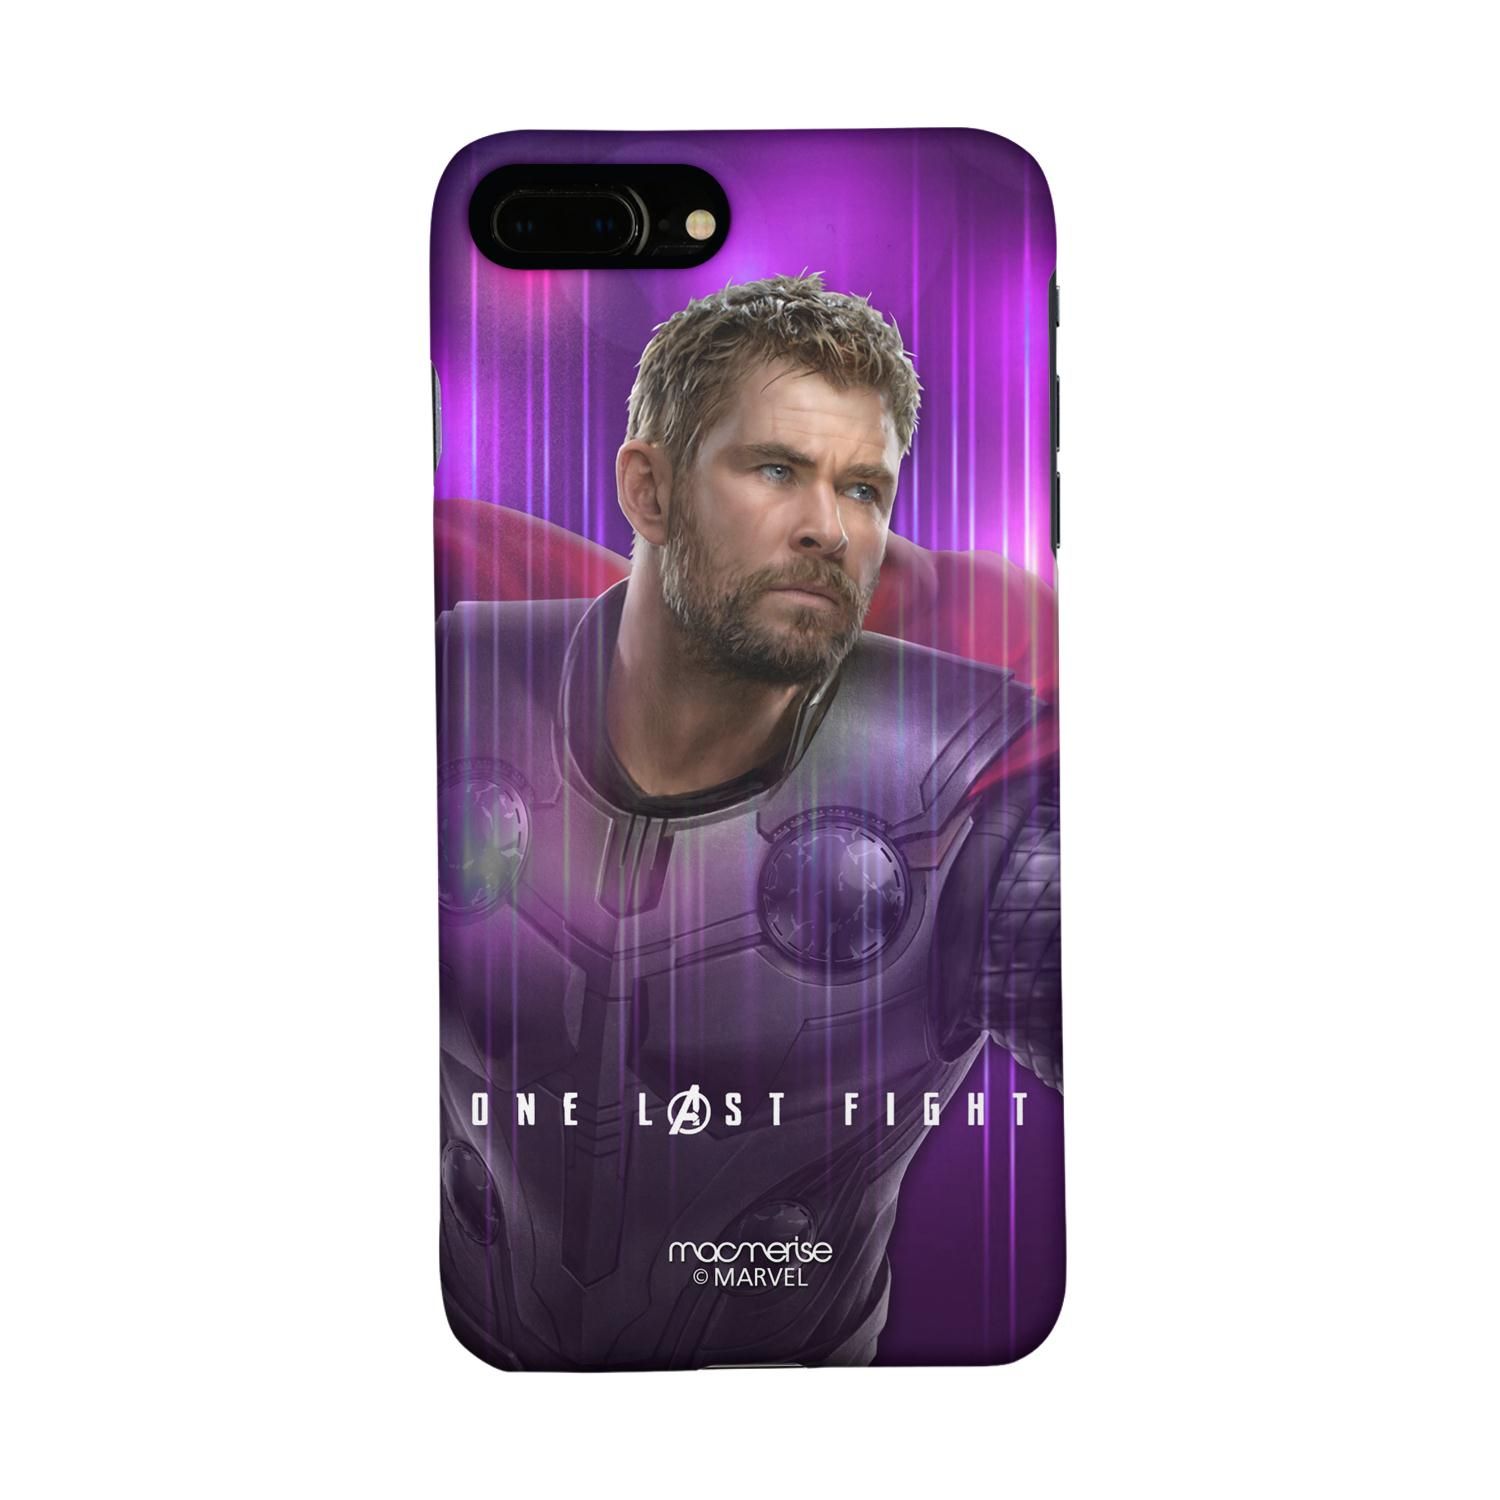 Buy One Last Fight - Sleek Phone Case for iPhone 7 Plus Online